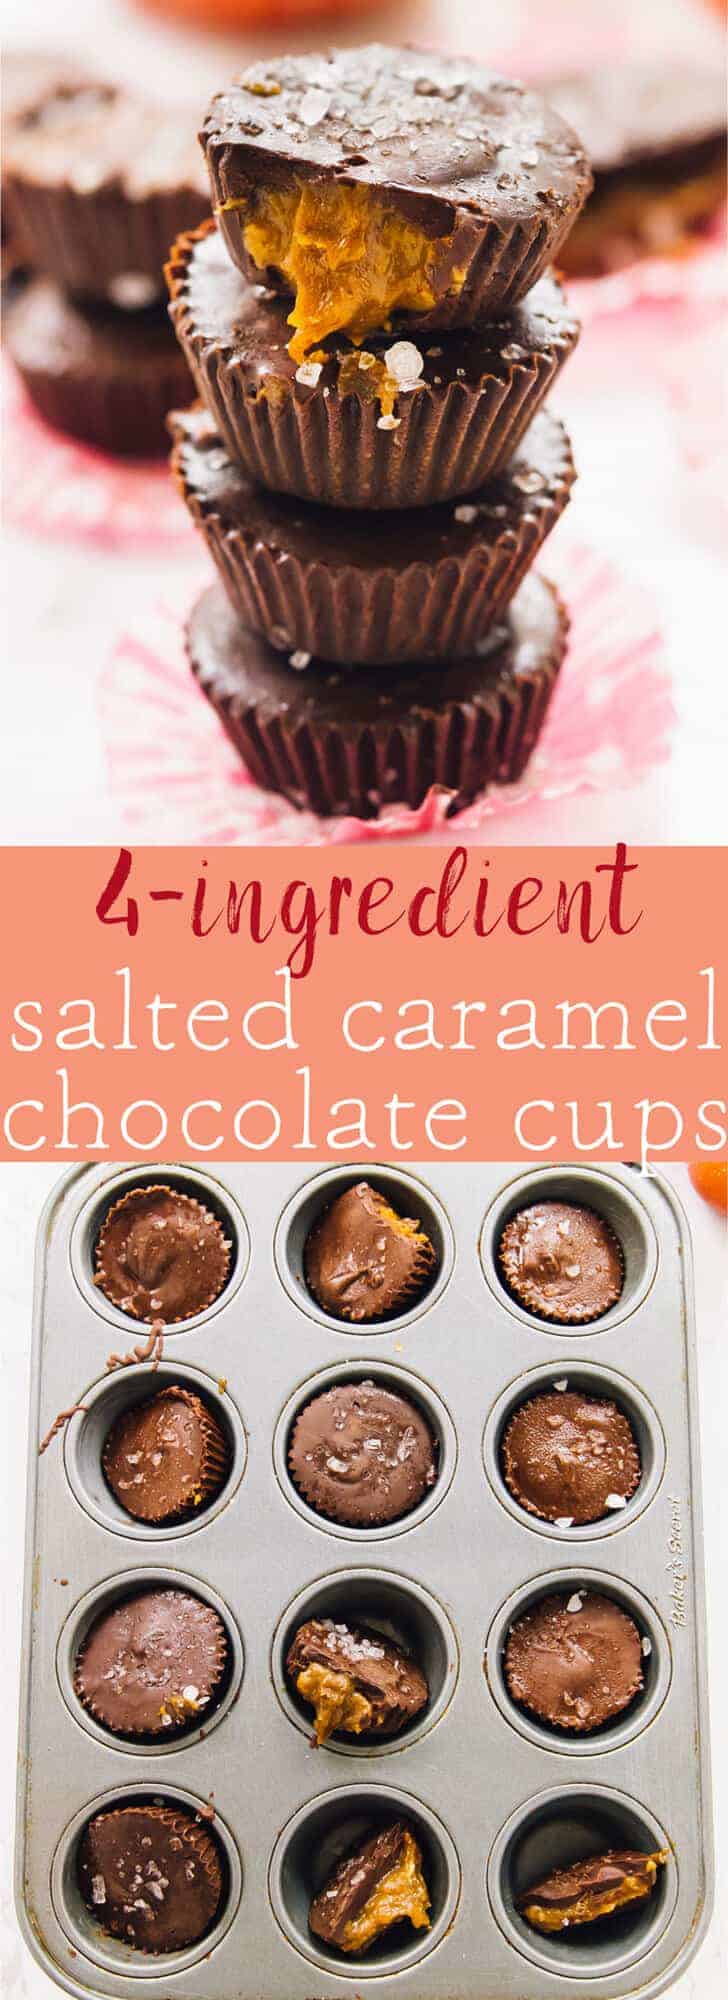 These 4-Ingredient Salted Caramel Chocolate Cups are a decadent holiday candy treat! They are incredibly easy to make, and are vegan, gluten free and no bake! via https://jessicainthekitchen.com